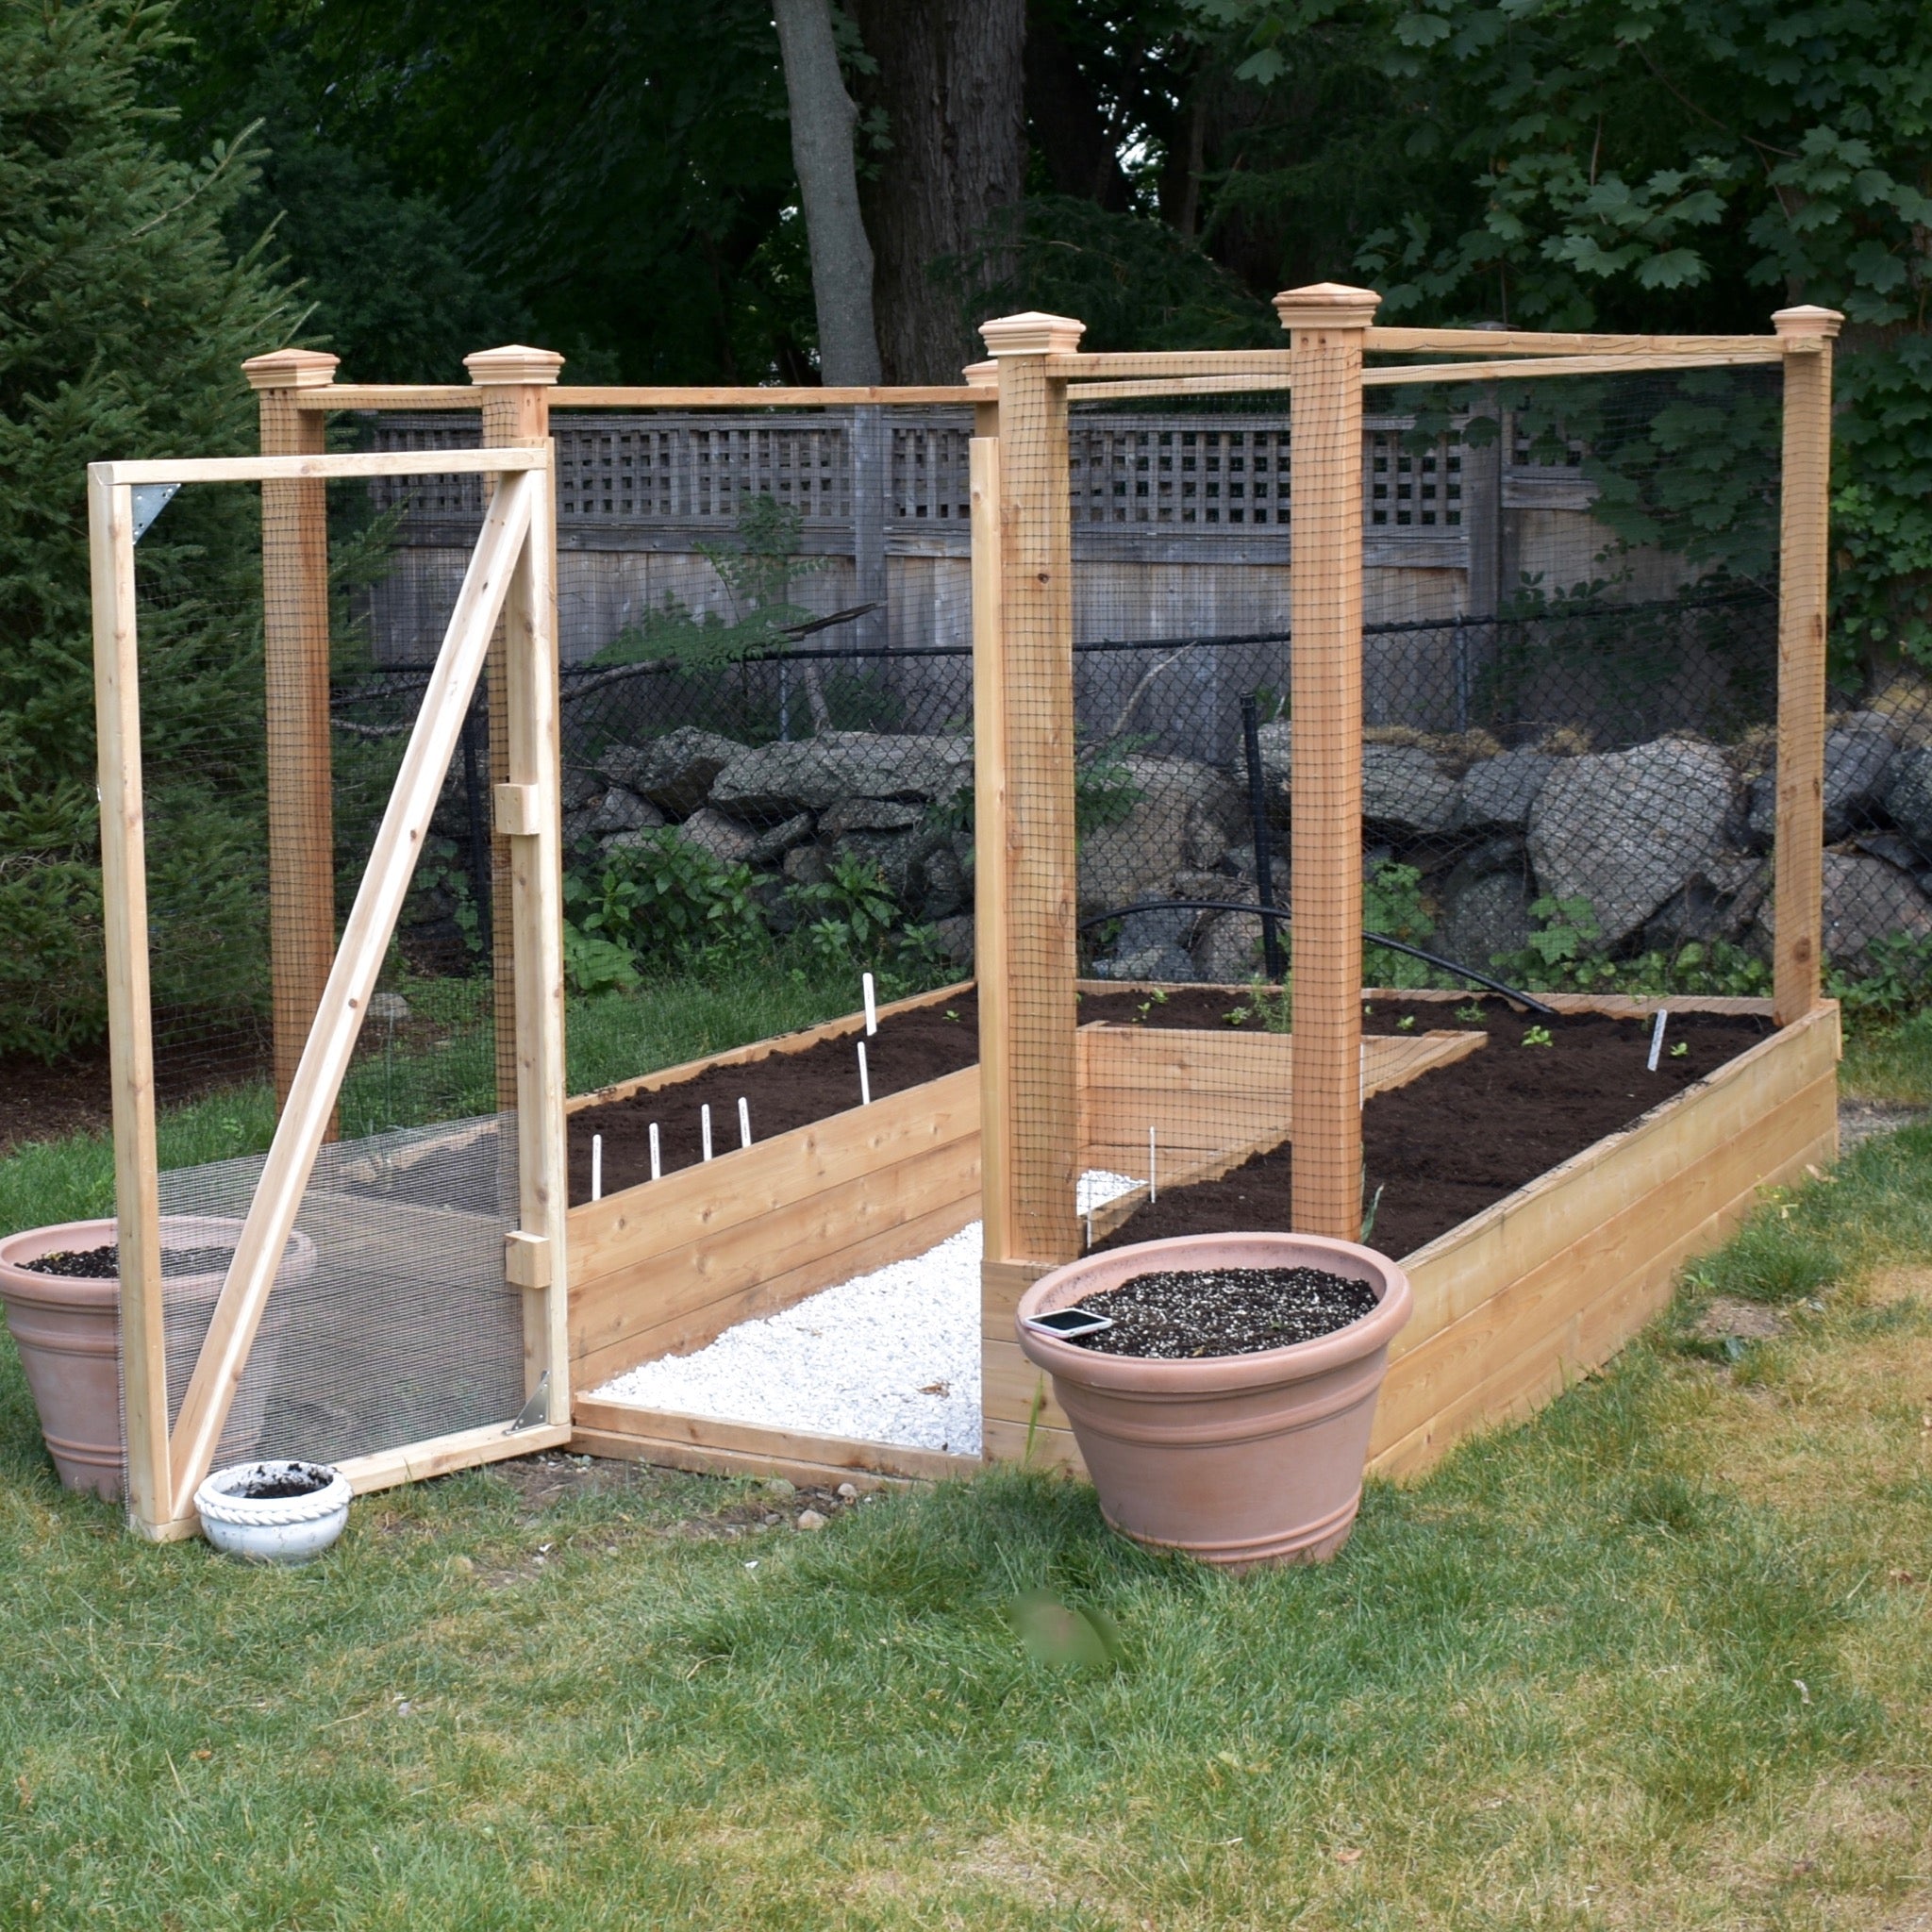 Garden Beds - Designs and Builds